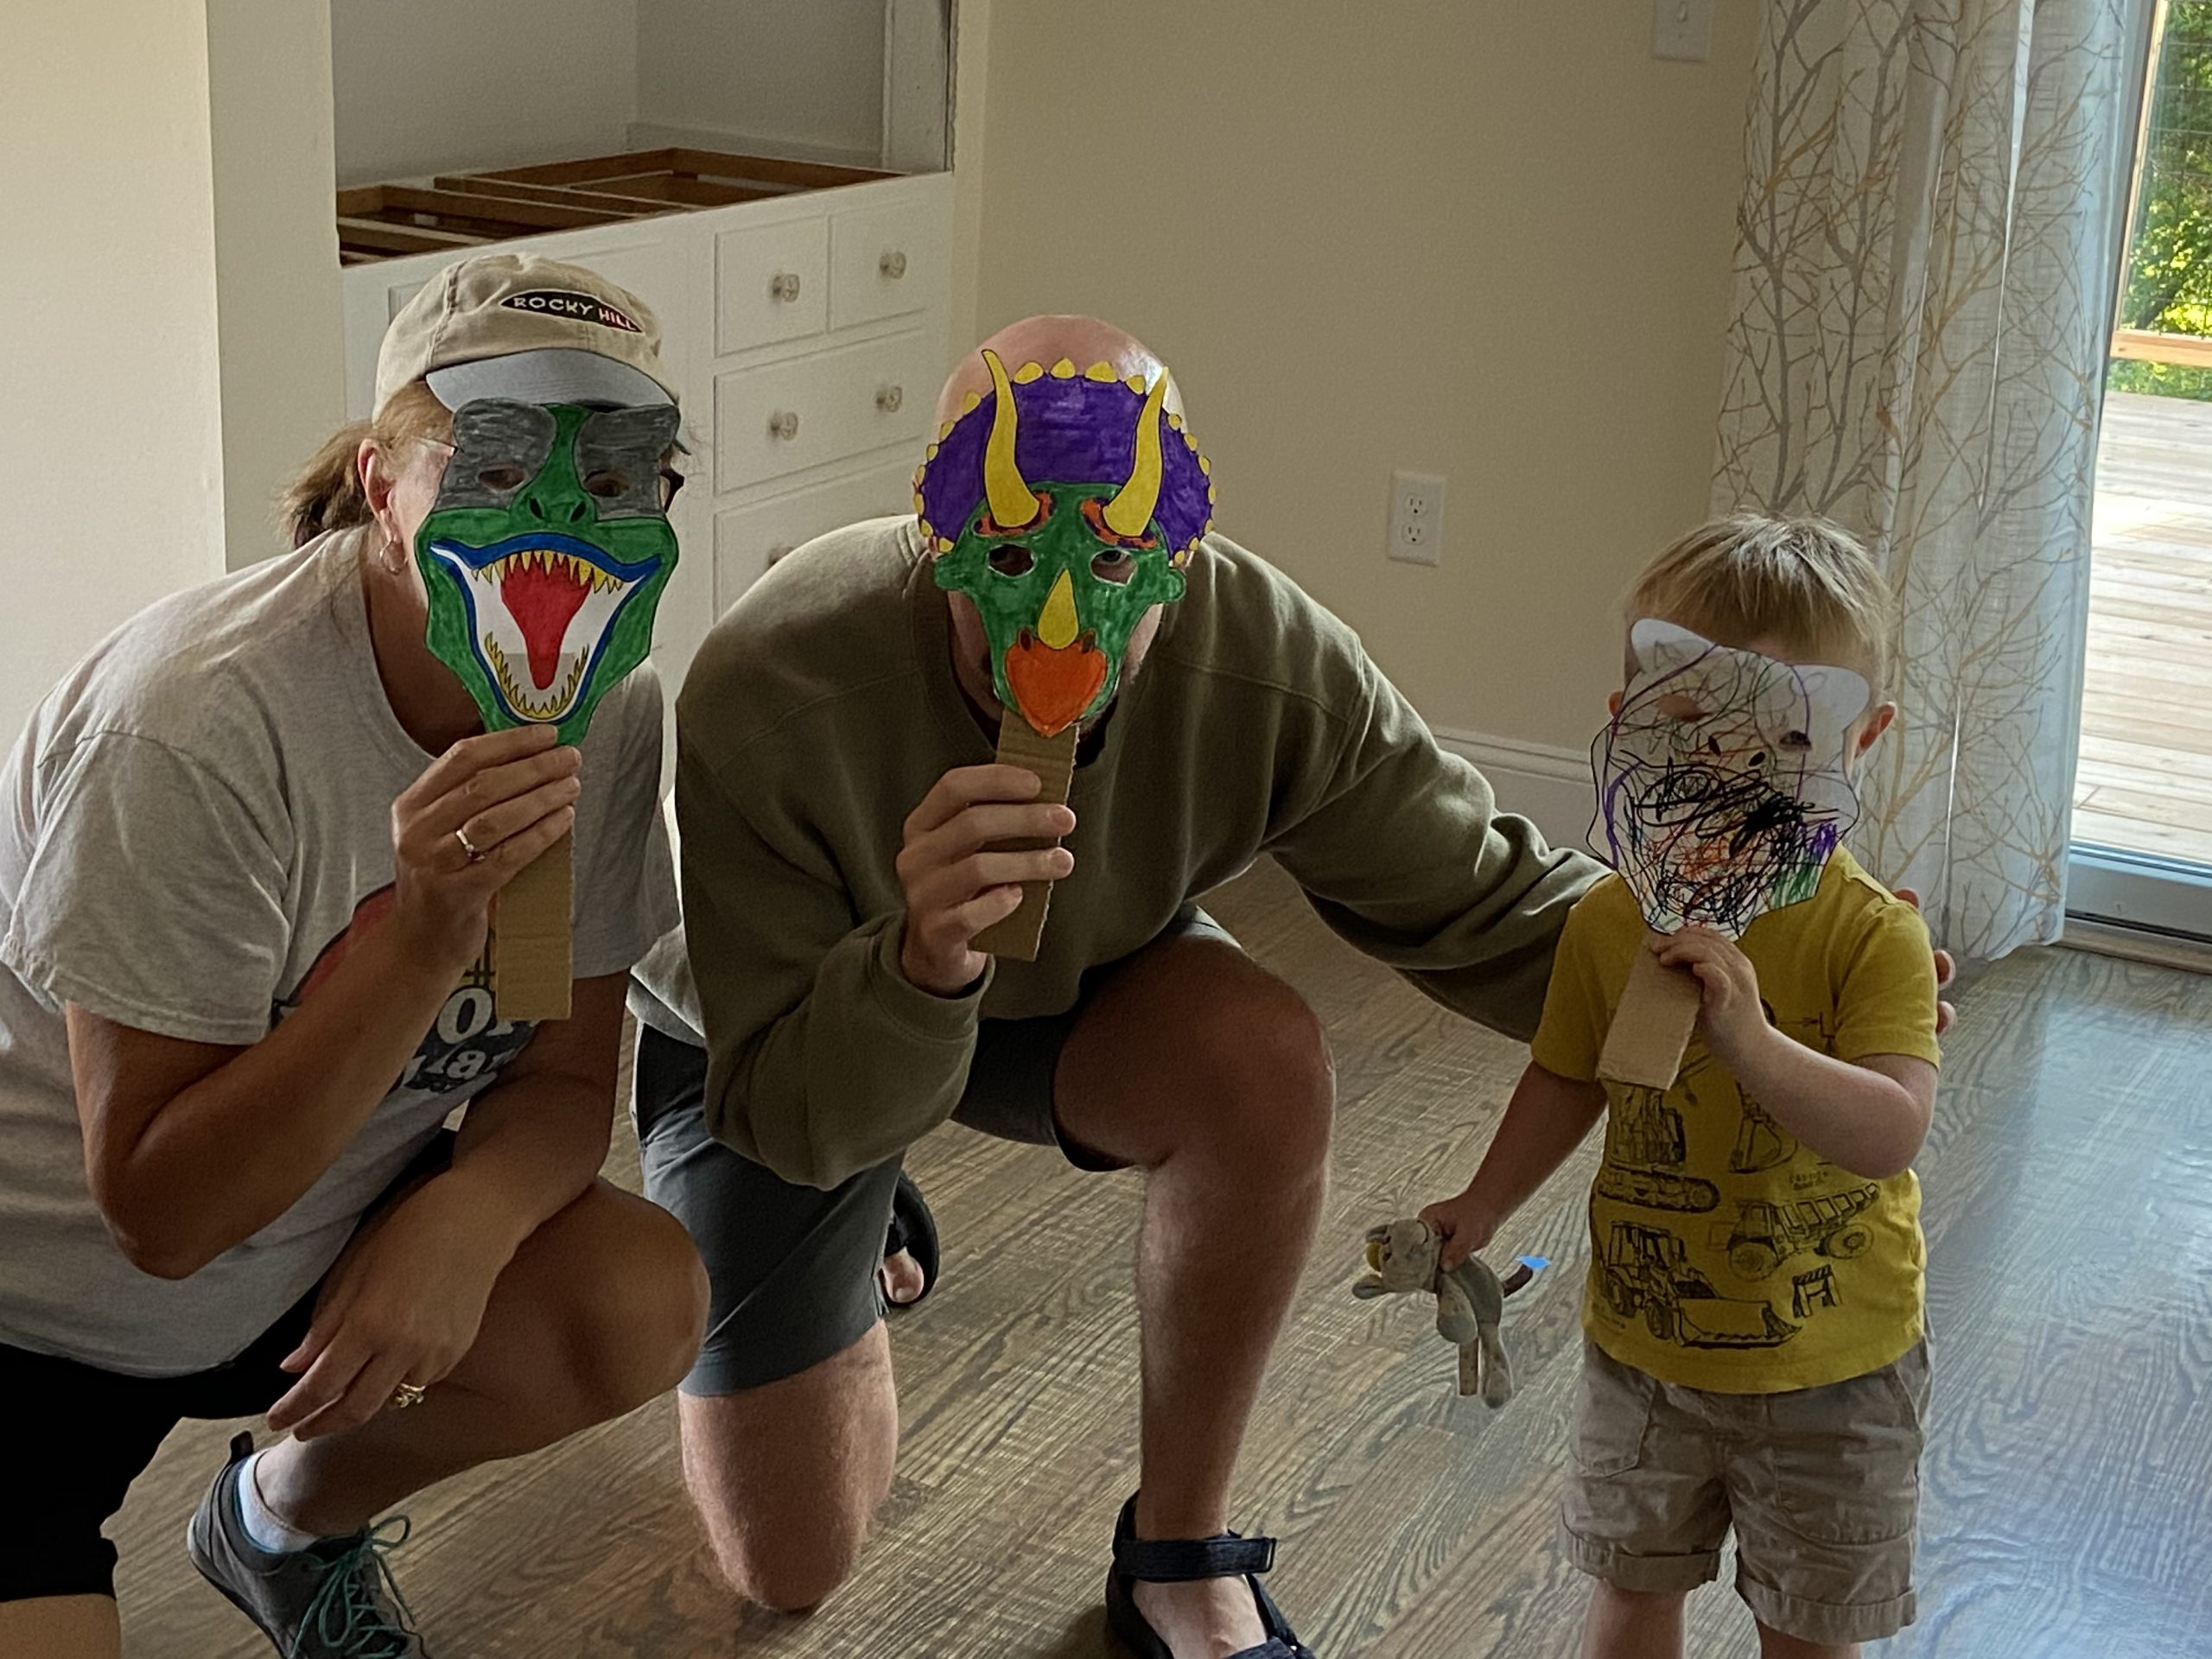 Two adults and one child hold up dinosaur masks over their faces